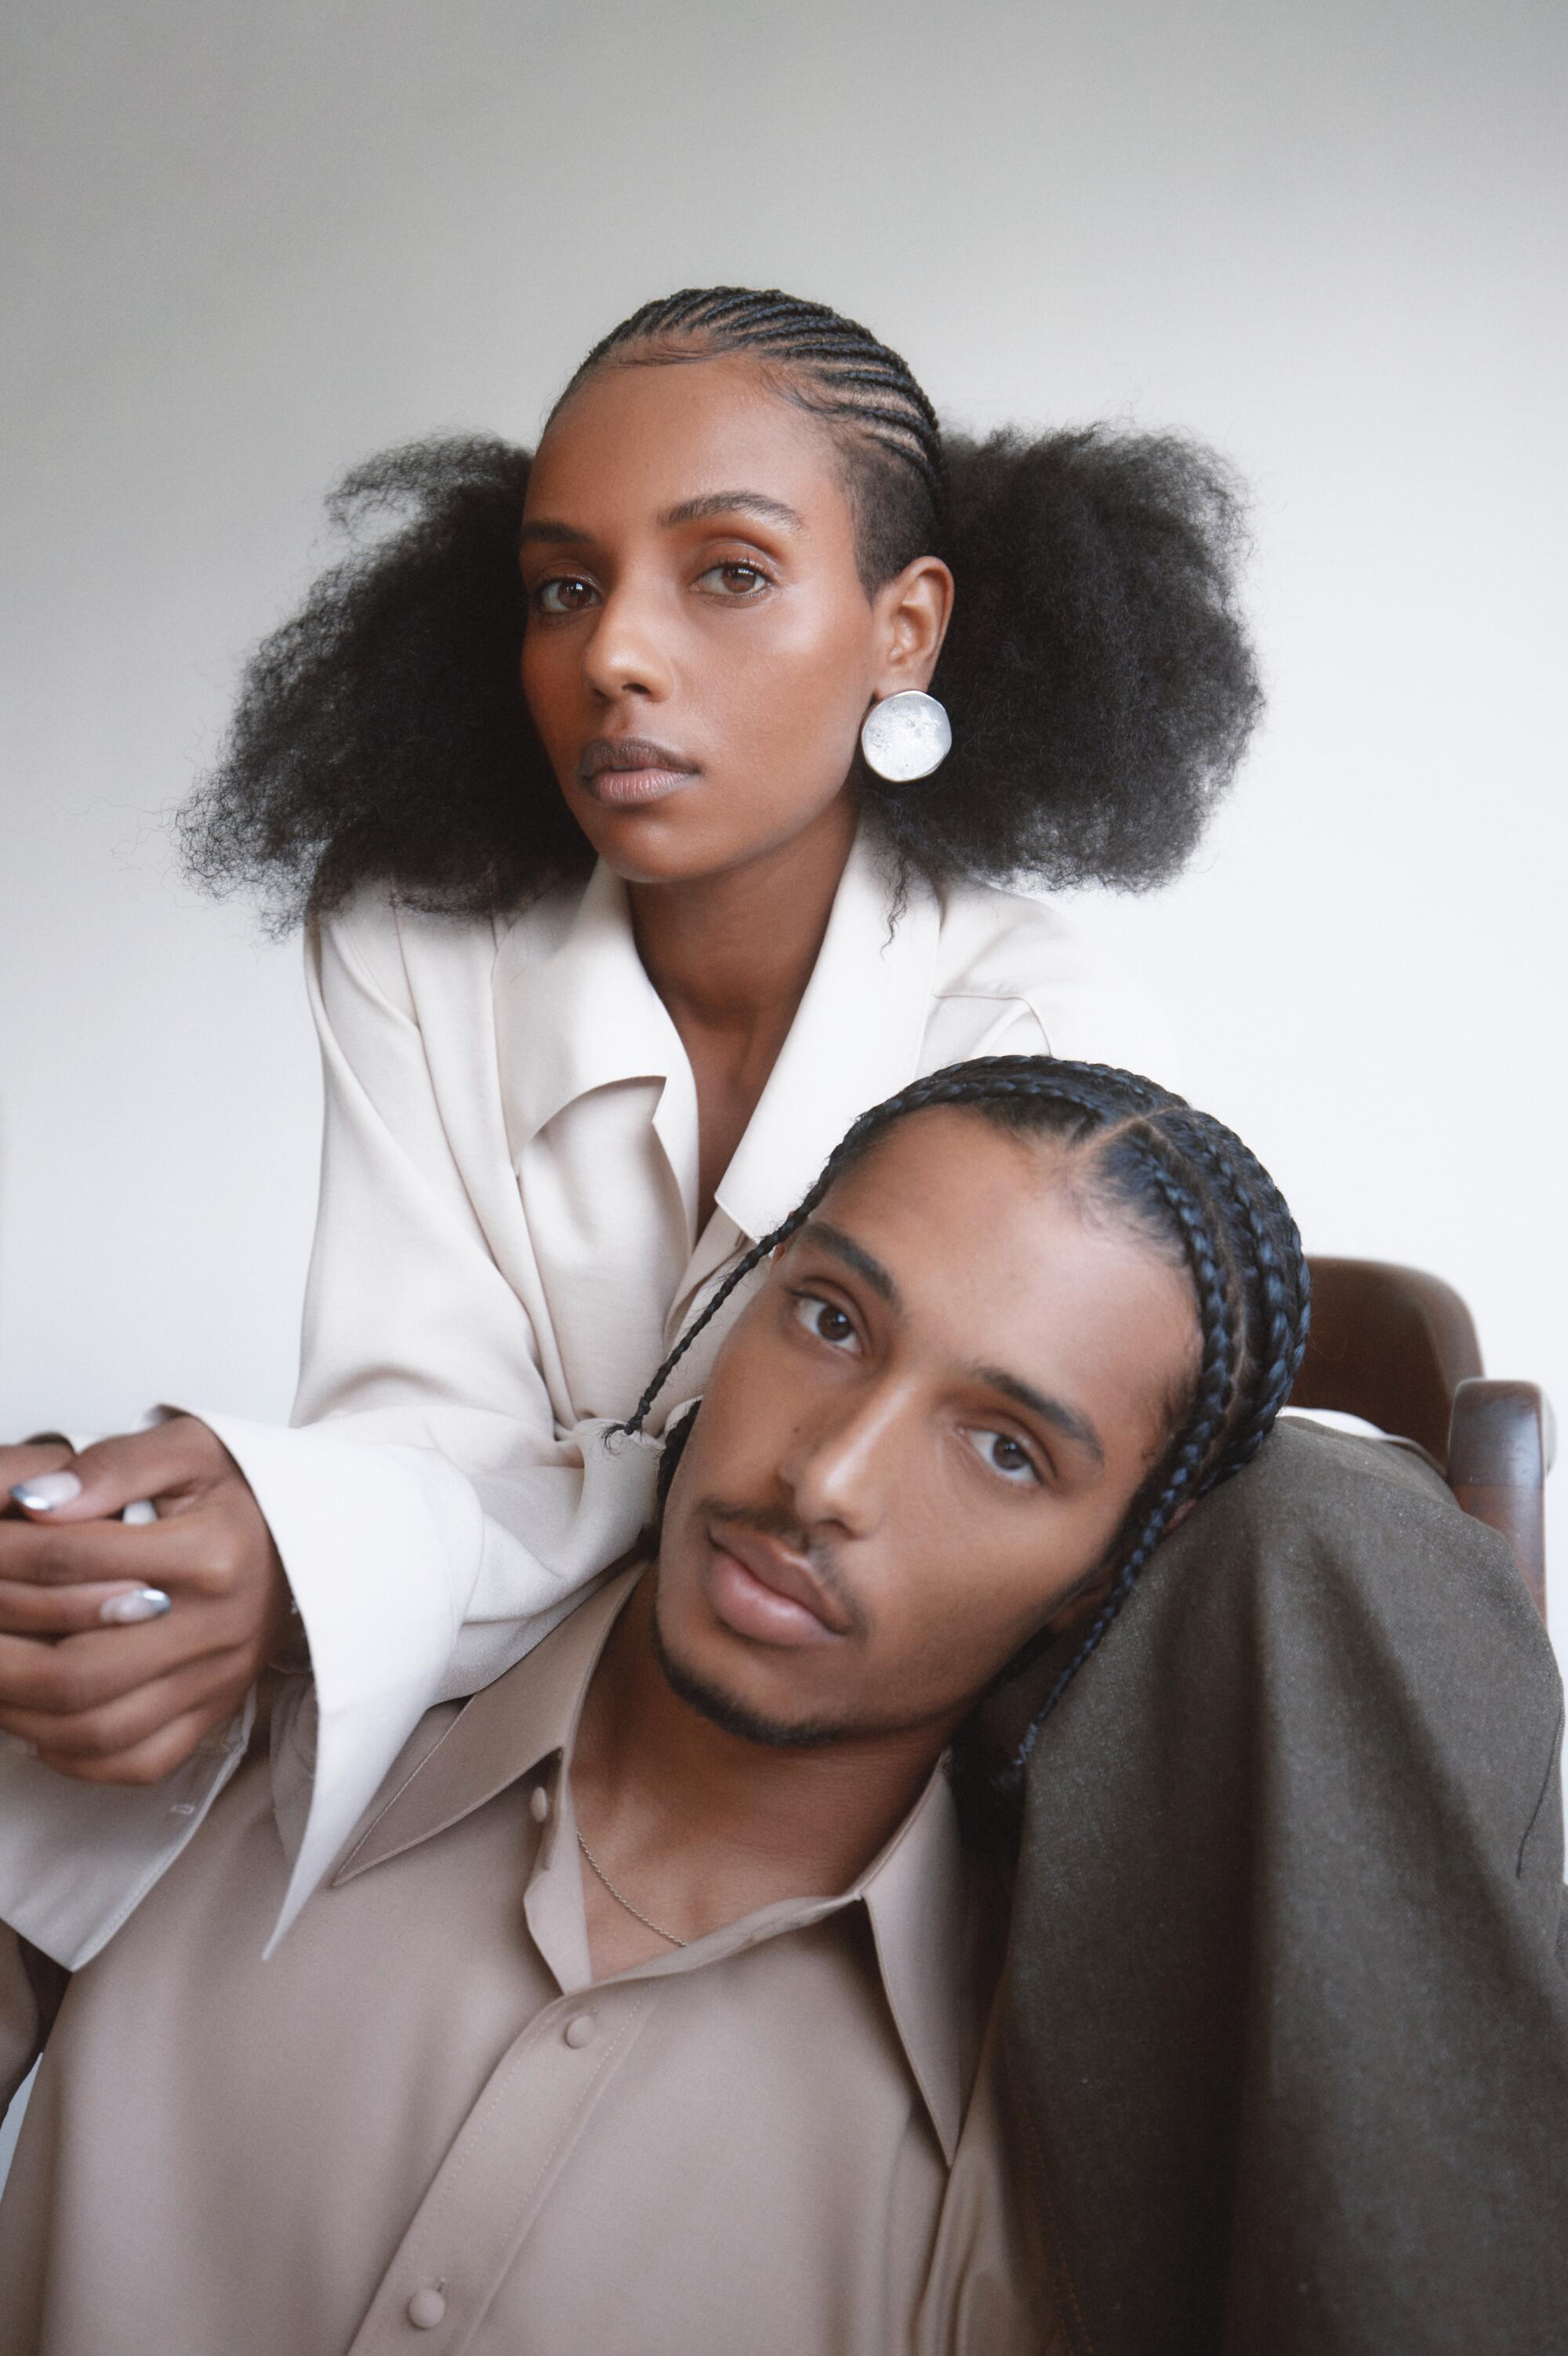 A male model wearing a beige collared shirt leans his head against the leg of a female model wearing a white collared shirt.